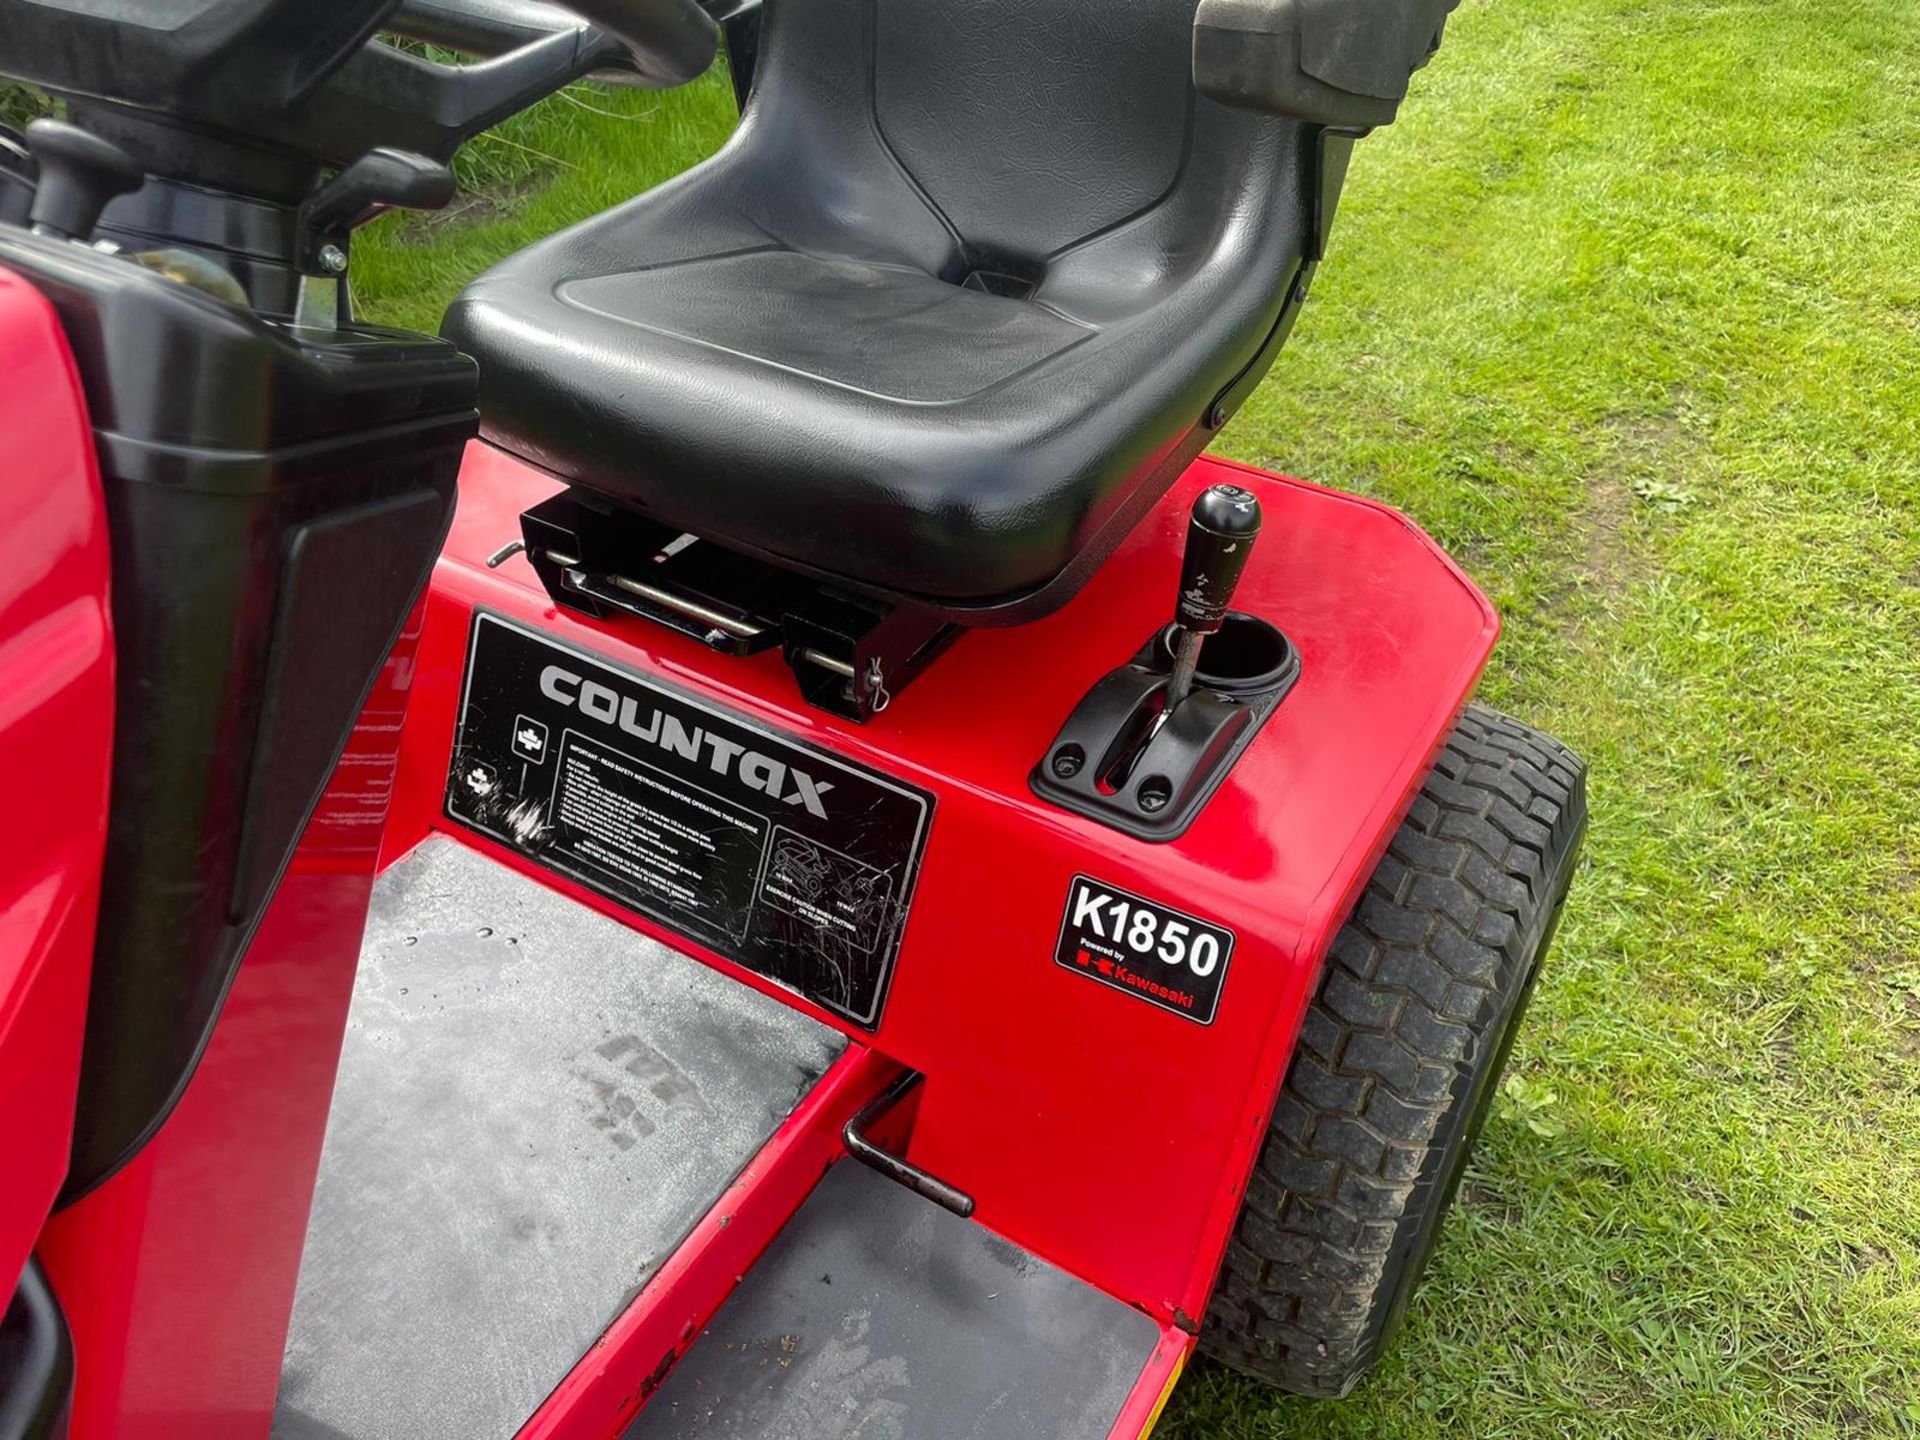 Countax K18-50 Ride On Lawn Mower *NO VAT* - Image 11 of 11